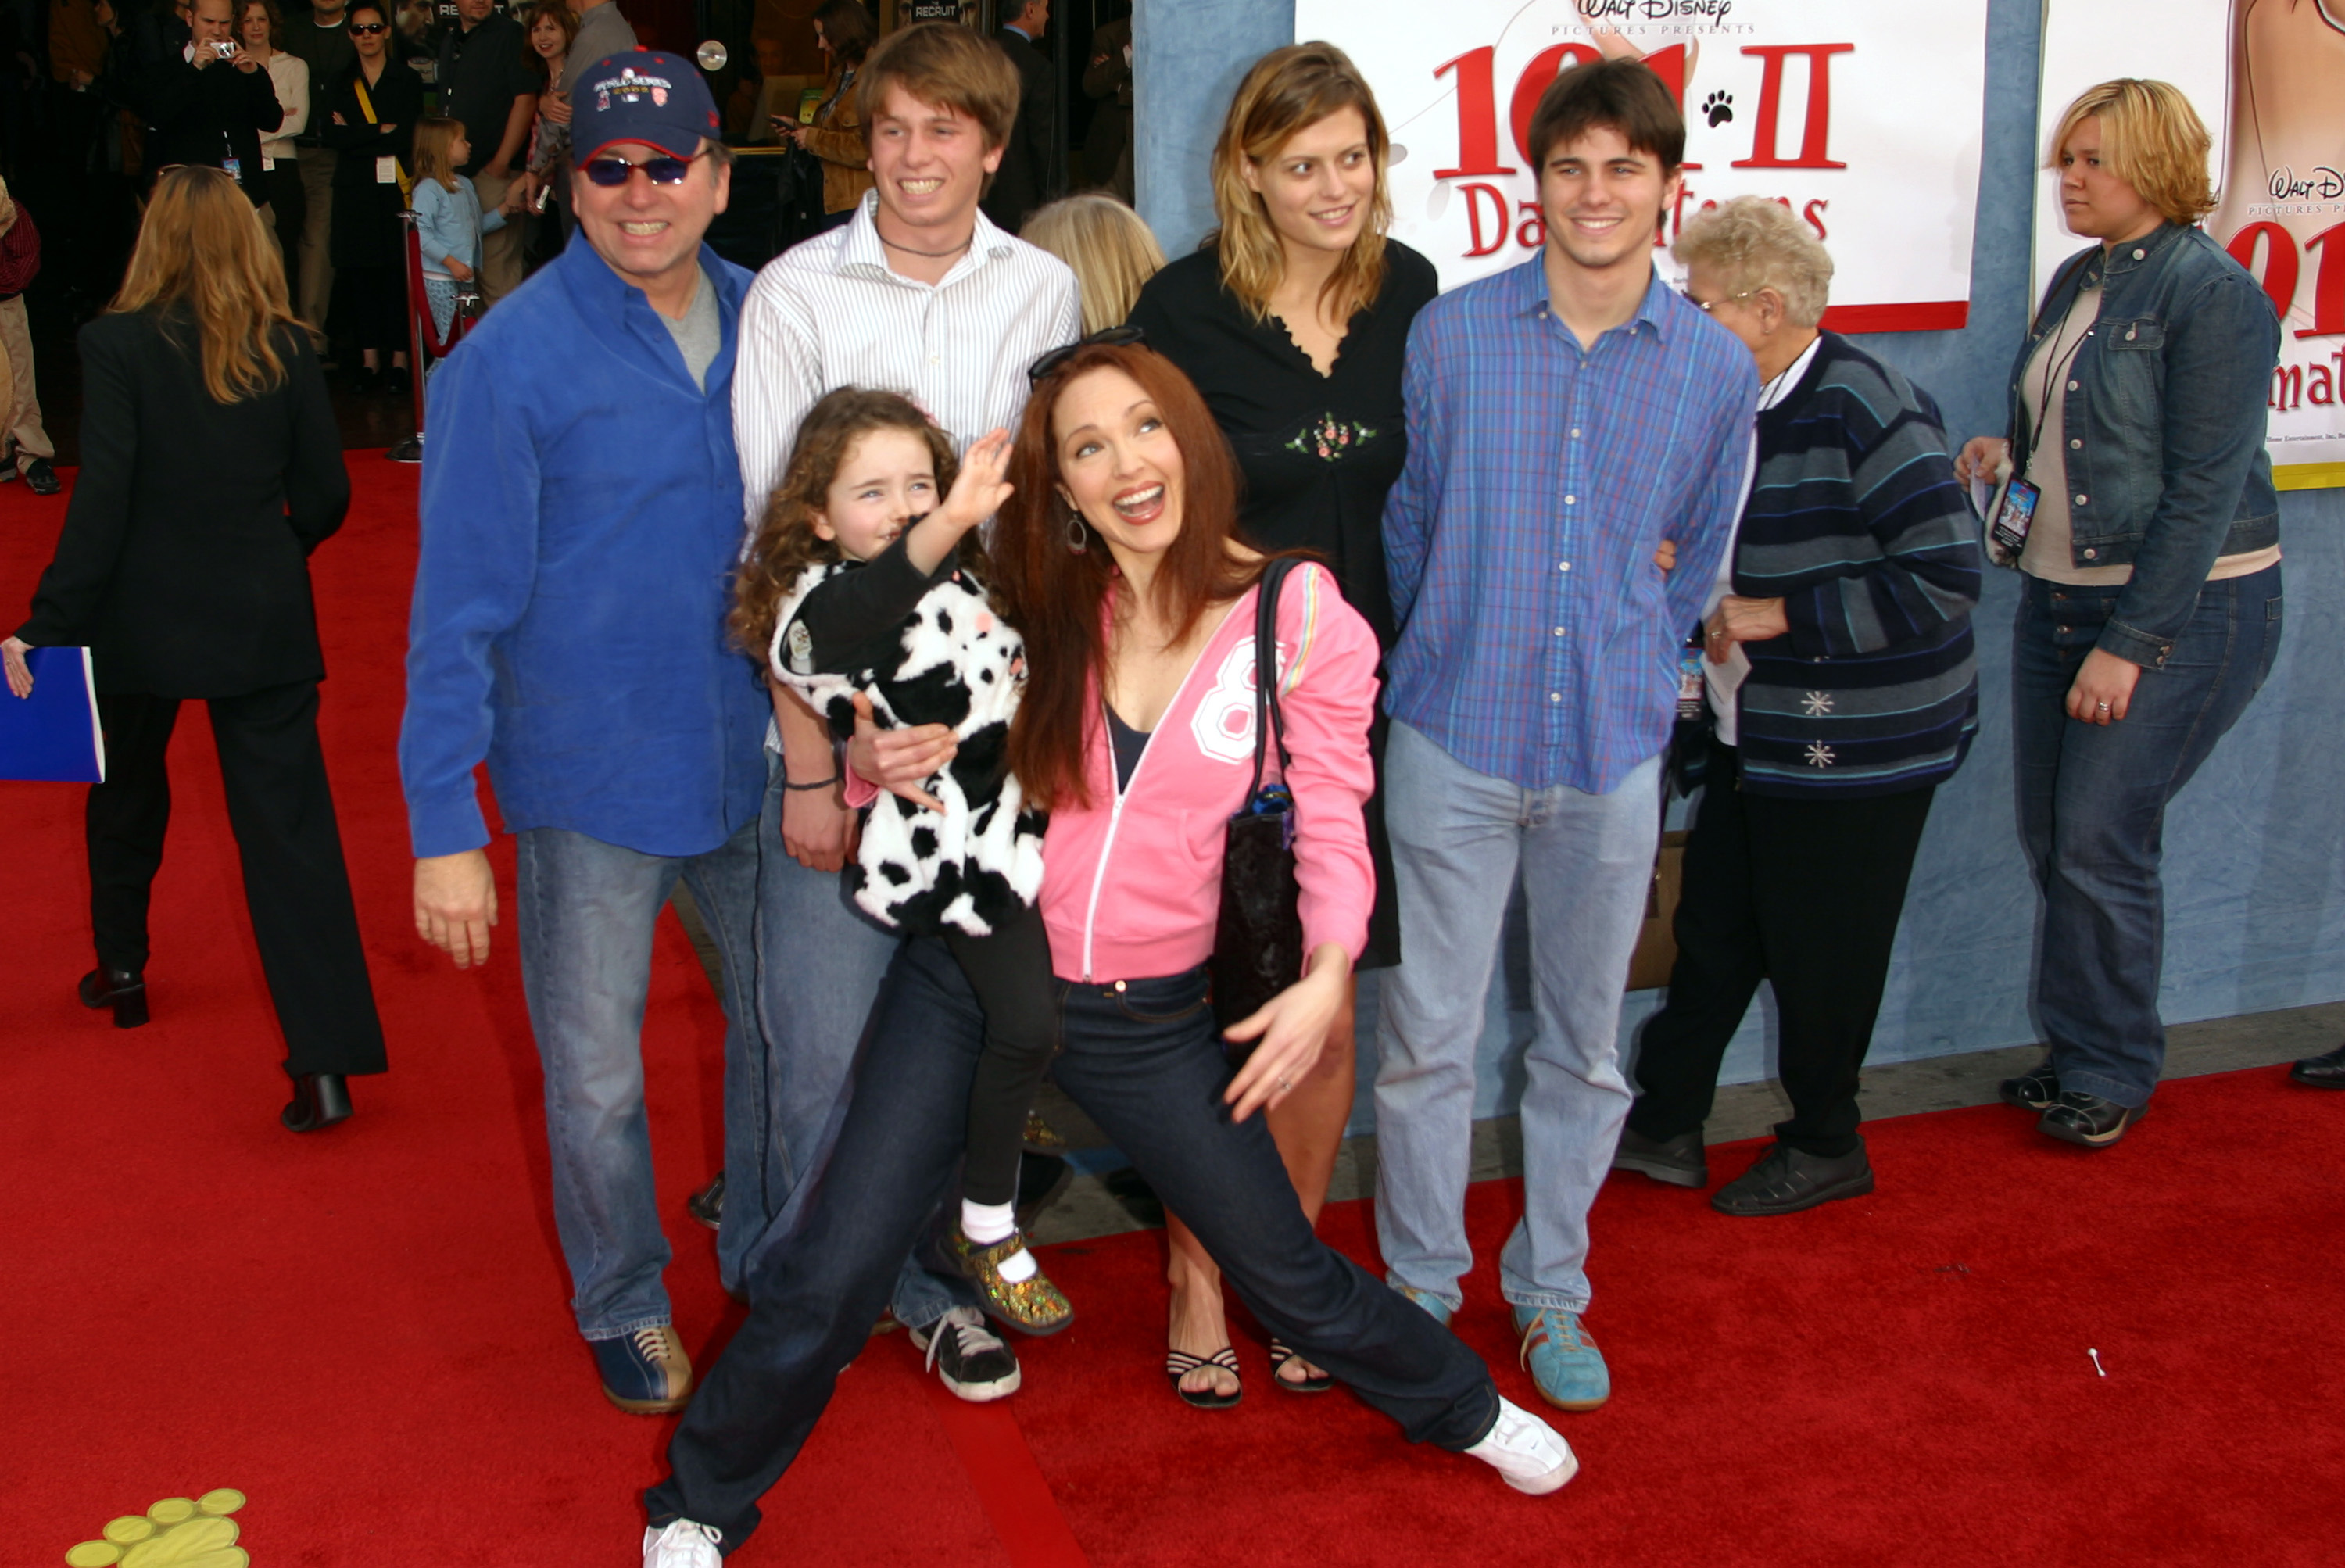 John Ritter, Amy Yasbeck and the actor's children at El Capitan Theatre in Hollywood, CA, United States in 2003 | Source: Getty Images